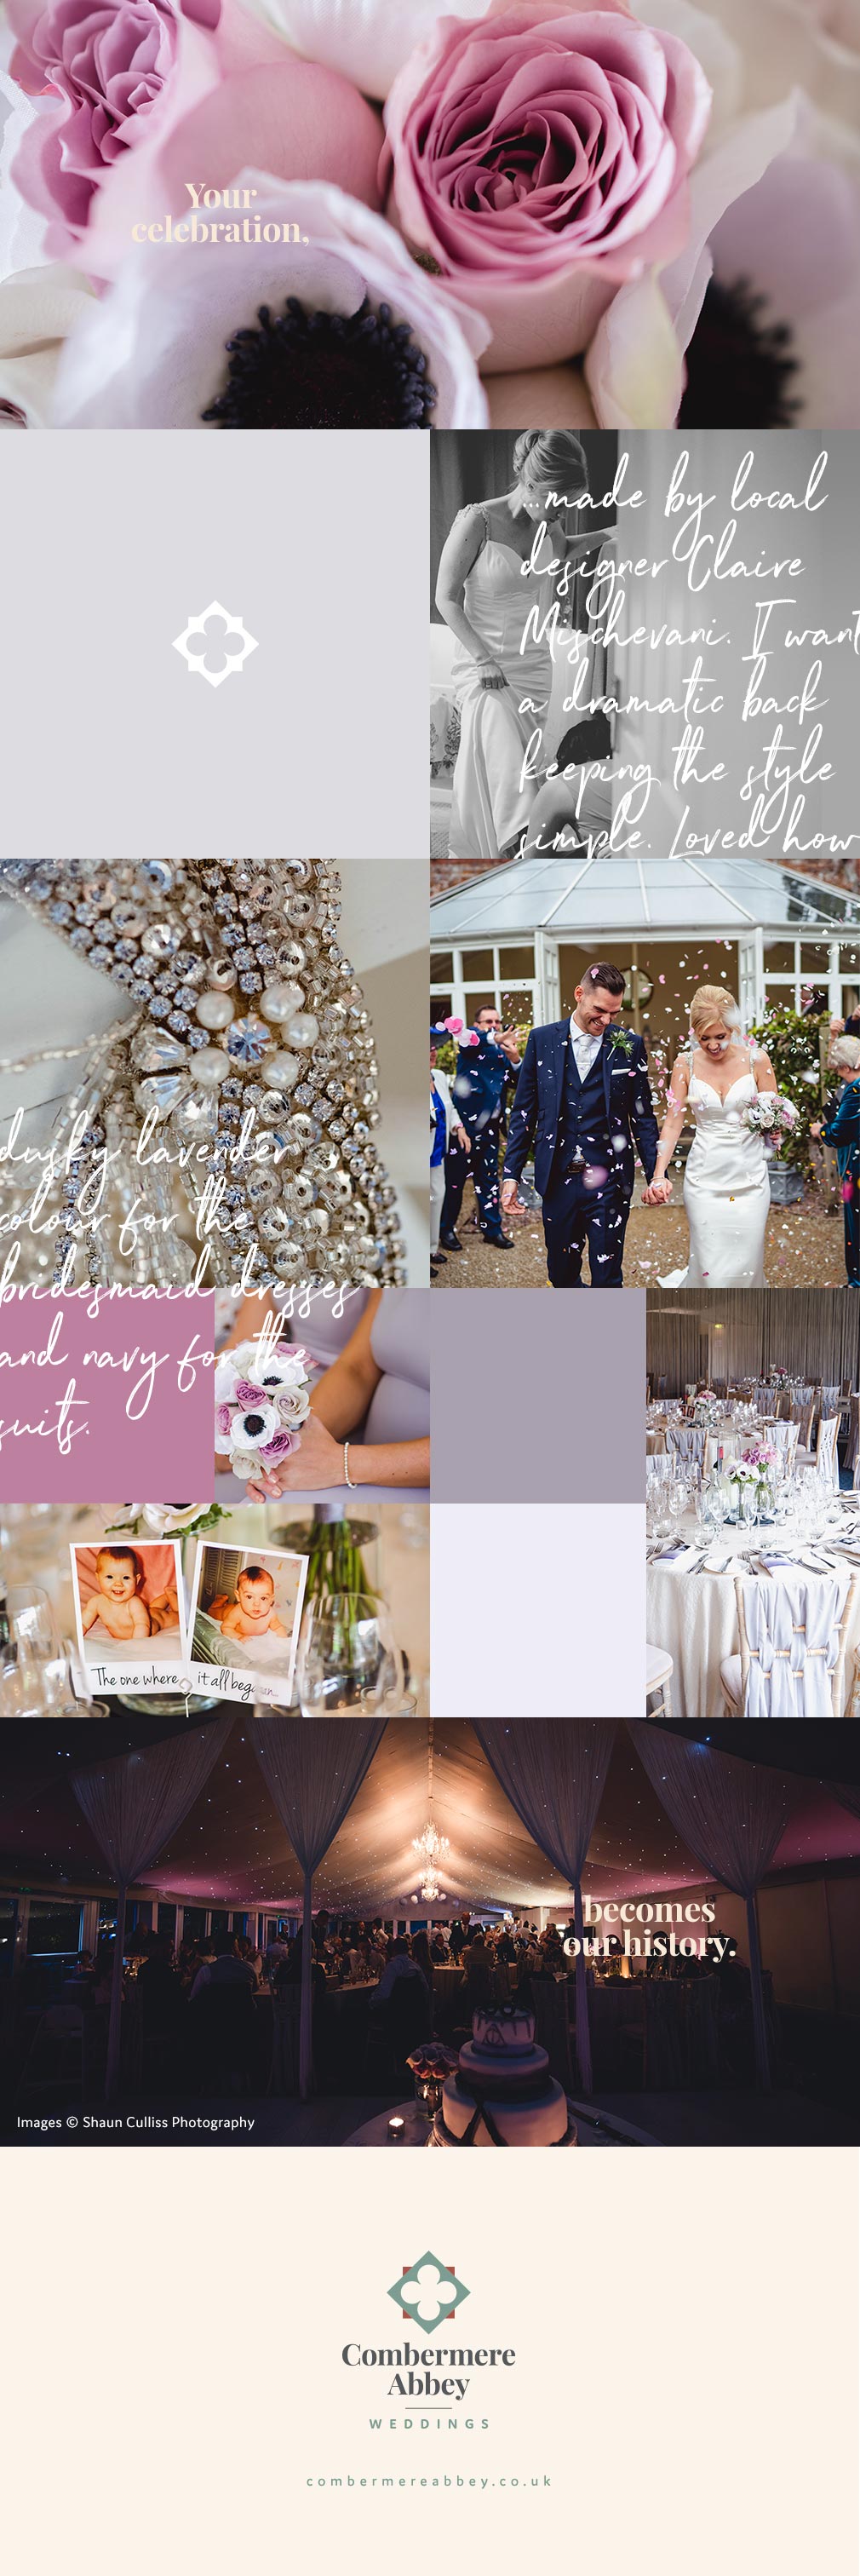 Kate and Scott's wedding style at Combermere Abbey